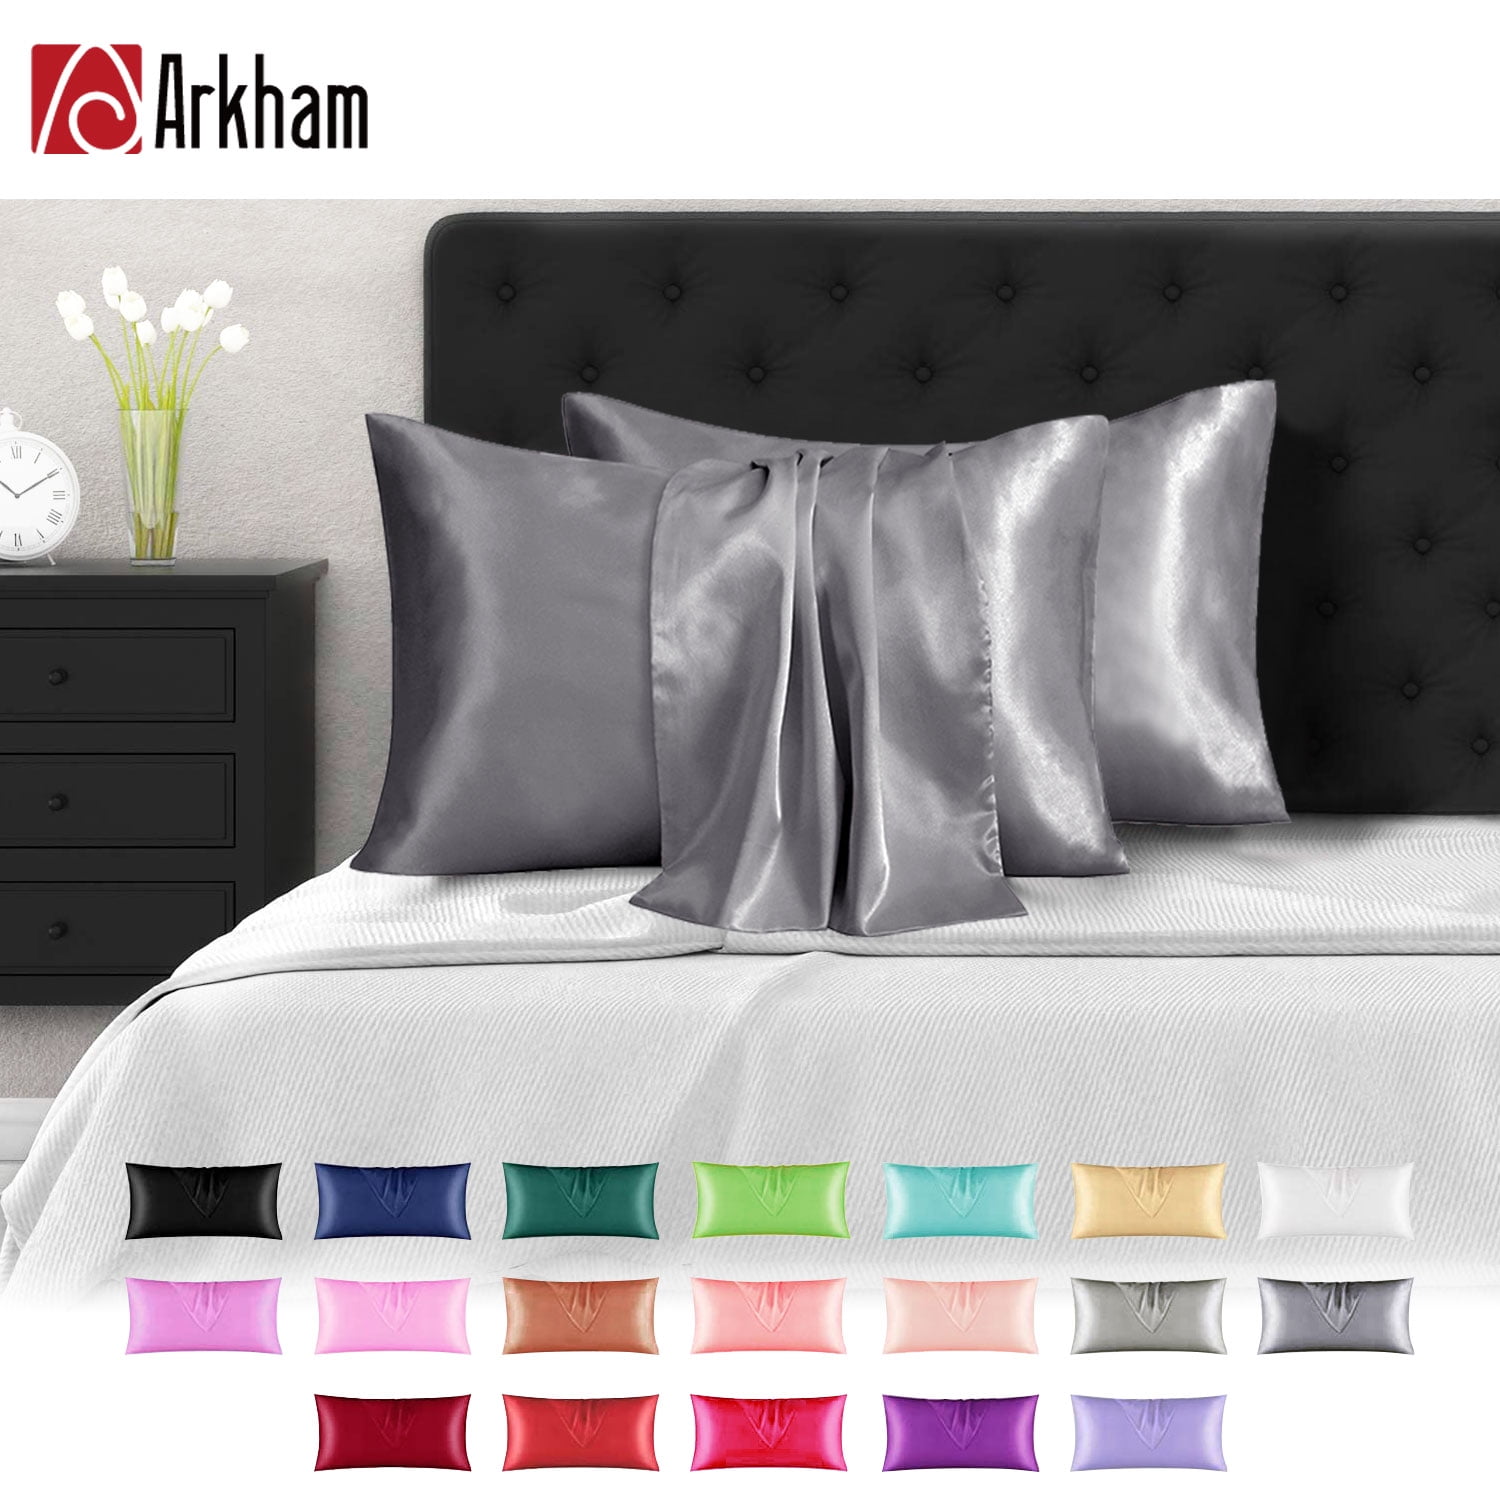 Details about   2 Pack 100% Pure Silk Satin Pillowcase Bedding Comfortable Soft Household Goods 